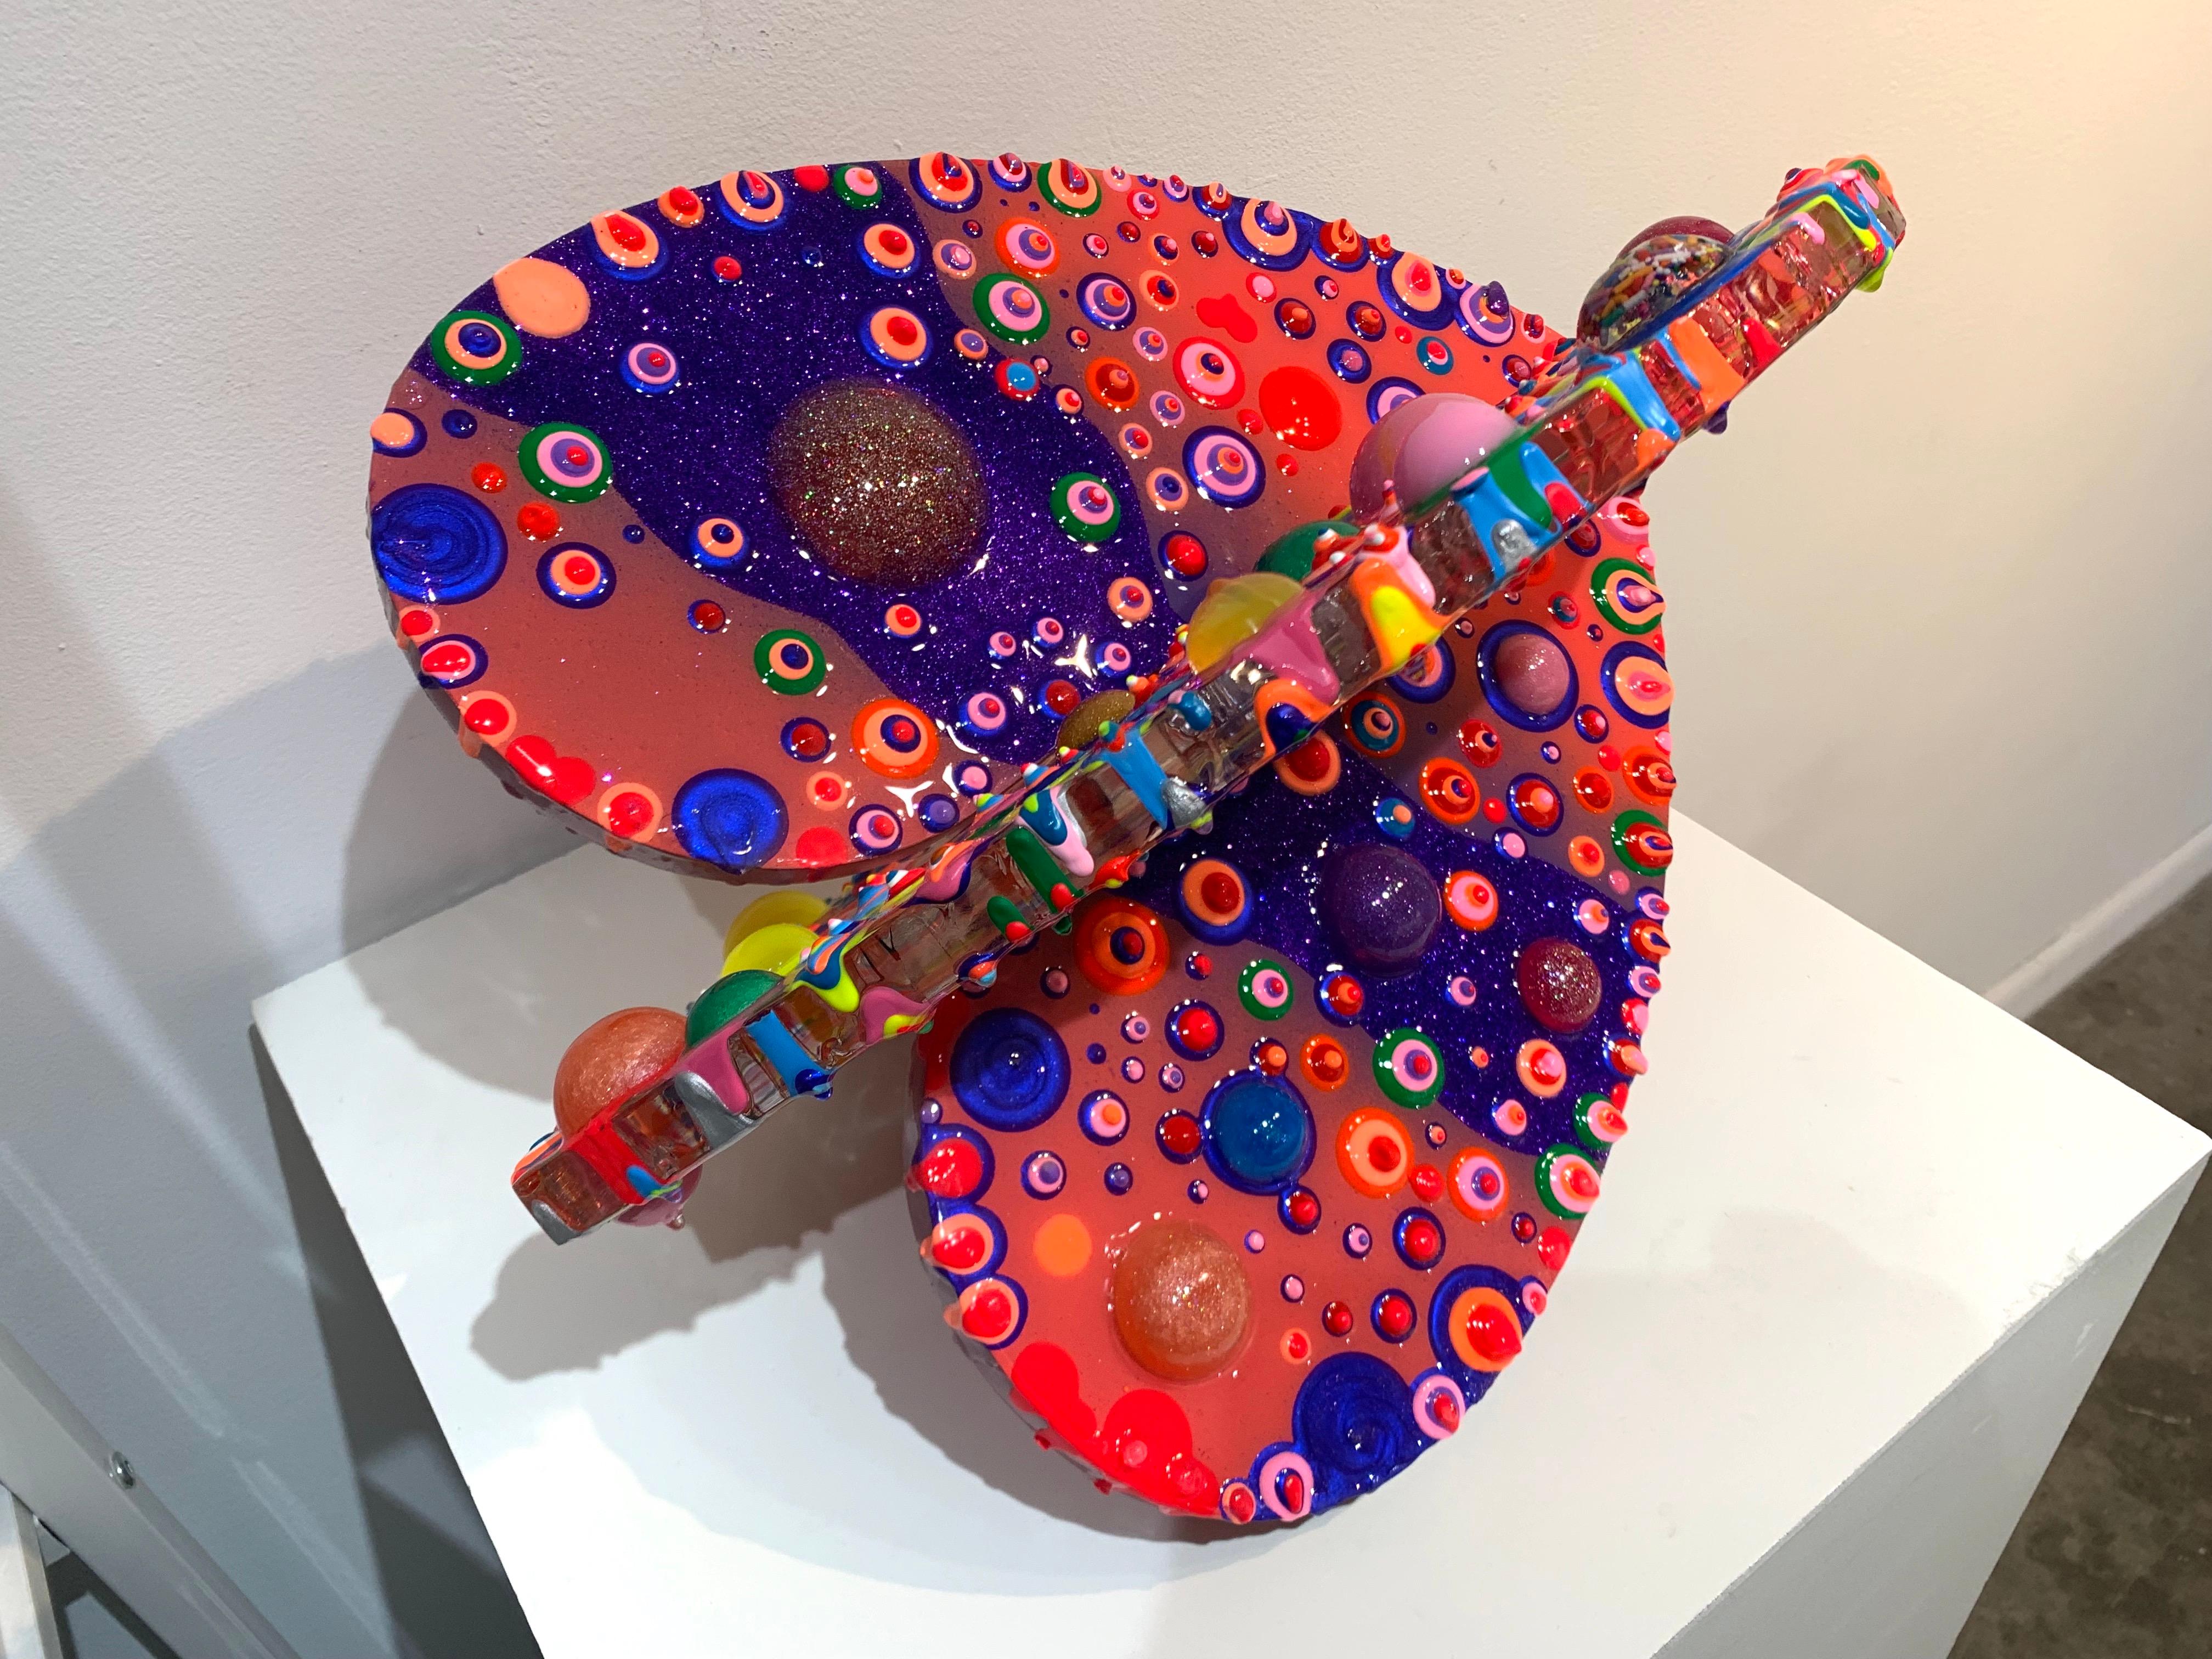 Michael Gitter, an American sculptor, has established a unique artistic identity through his masterful use of diverse materials, notably steel and acrylics, in crafting emotive and stylized artworks. His portfolio is a testament to his adeptness in